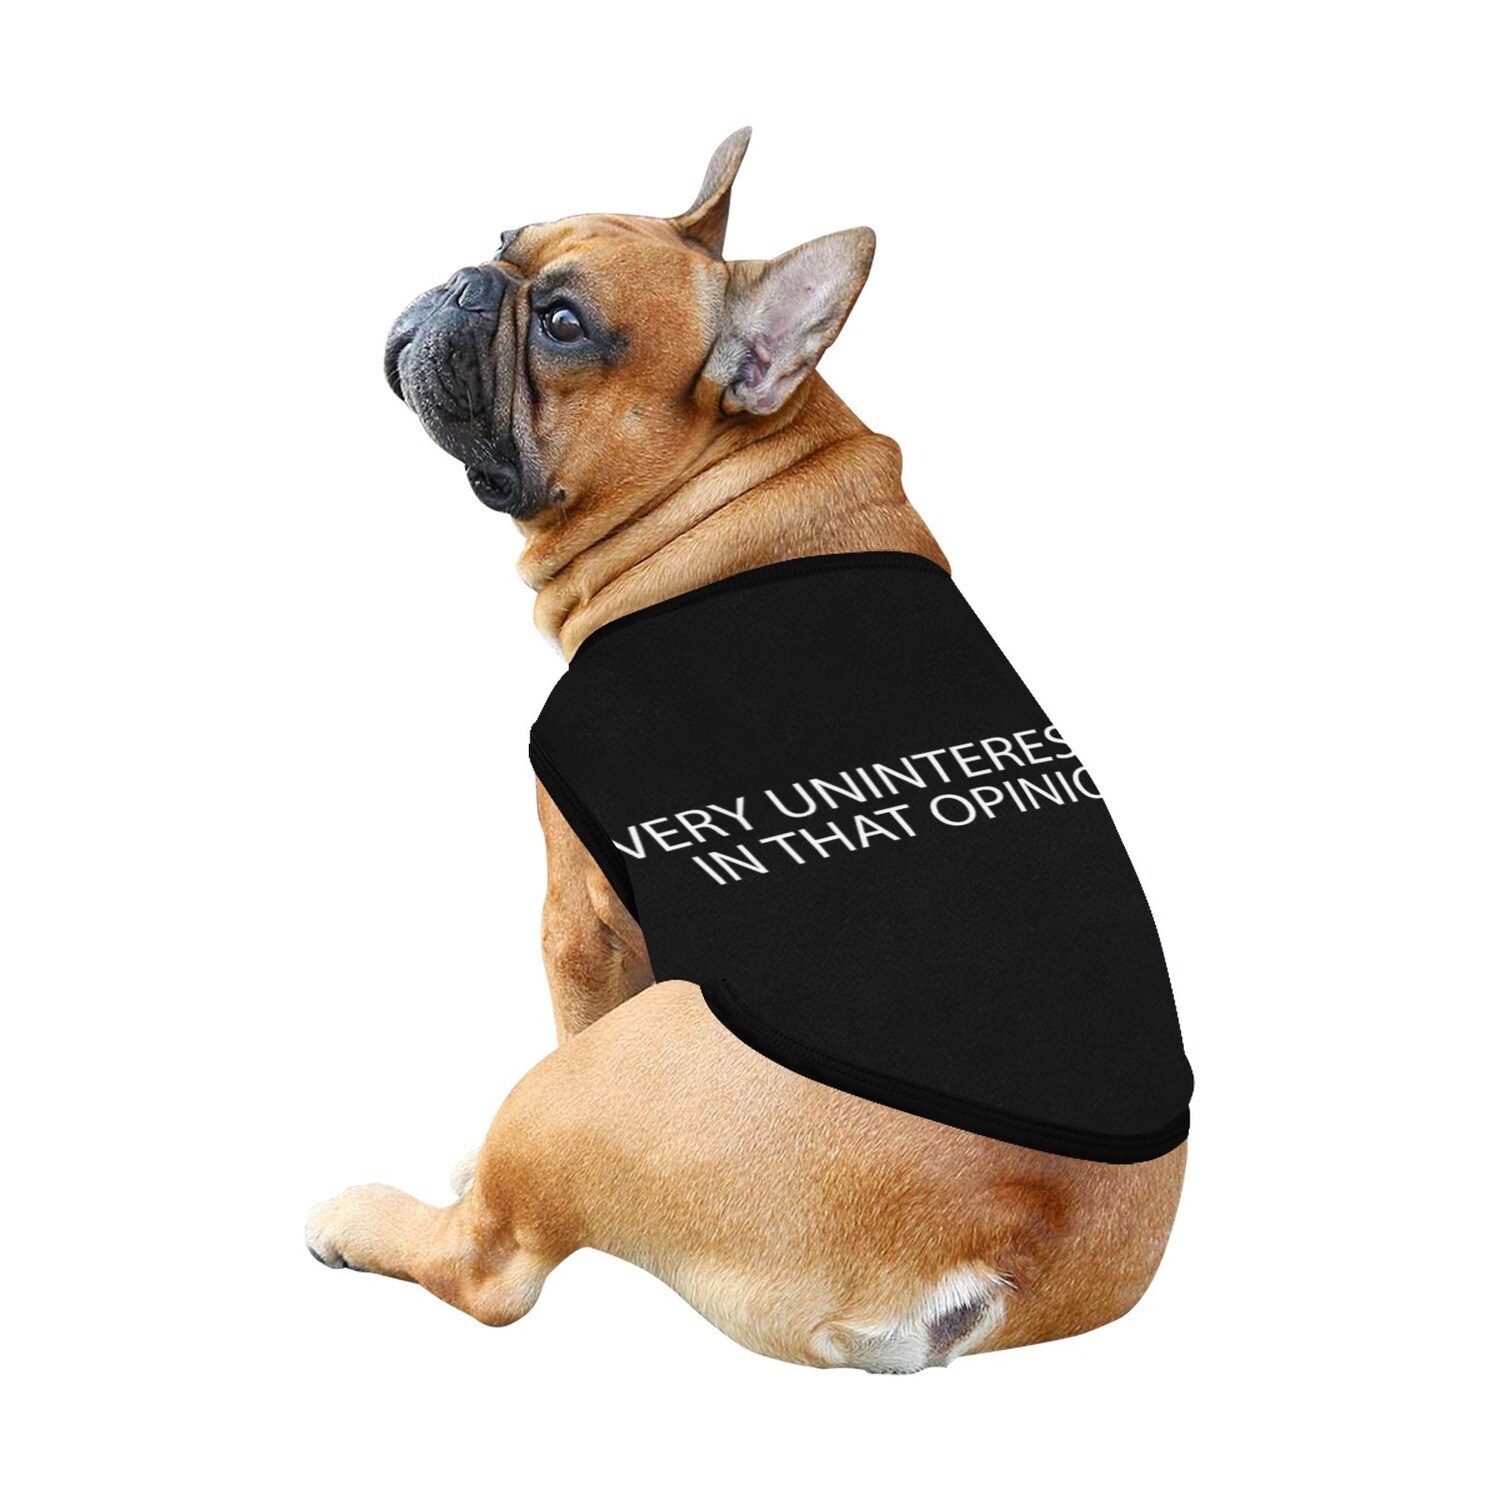 🐕 David Rose very uninterested in that opinion Dog t-shirt, Dog Tank Top, Dog shirt, Dog clothes, Gifts, front back print, 7 sizes XS to 3XL, Schitt's Creek, TV series